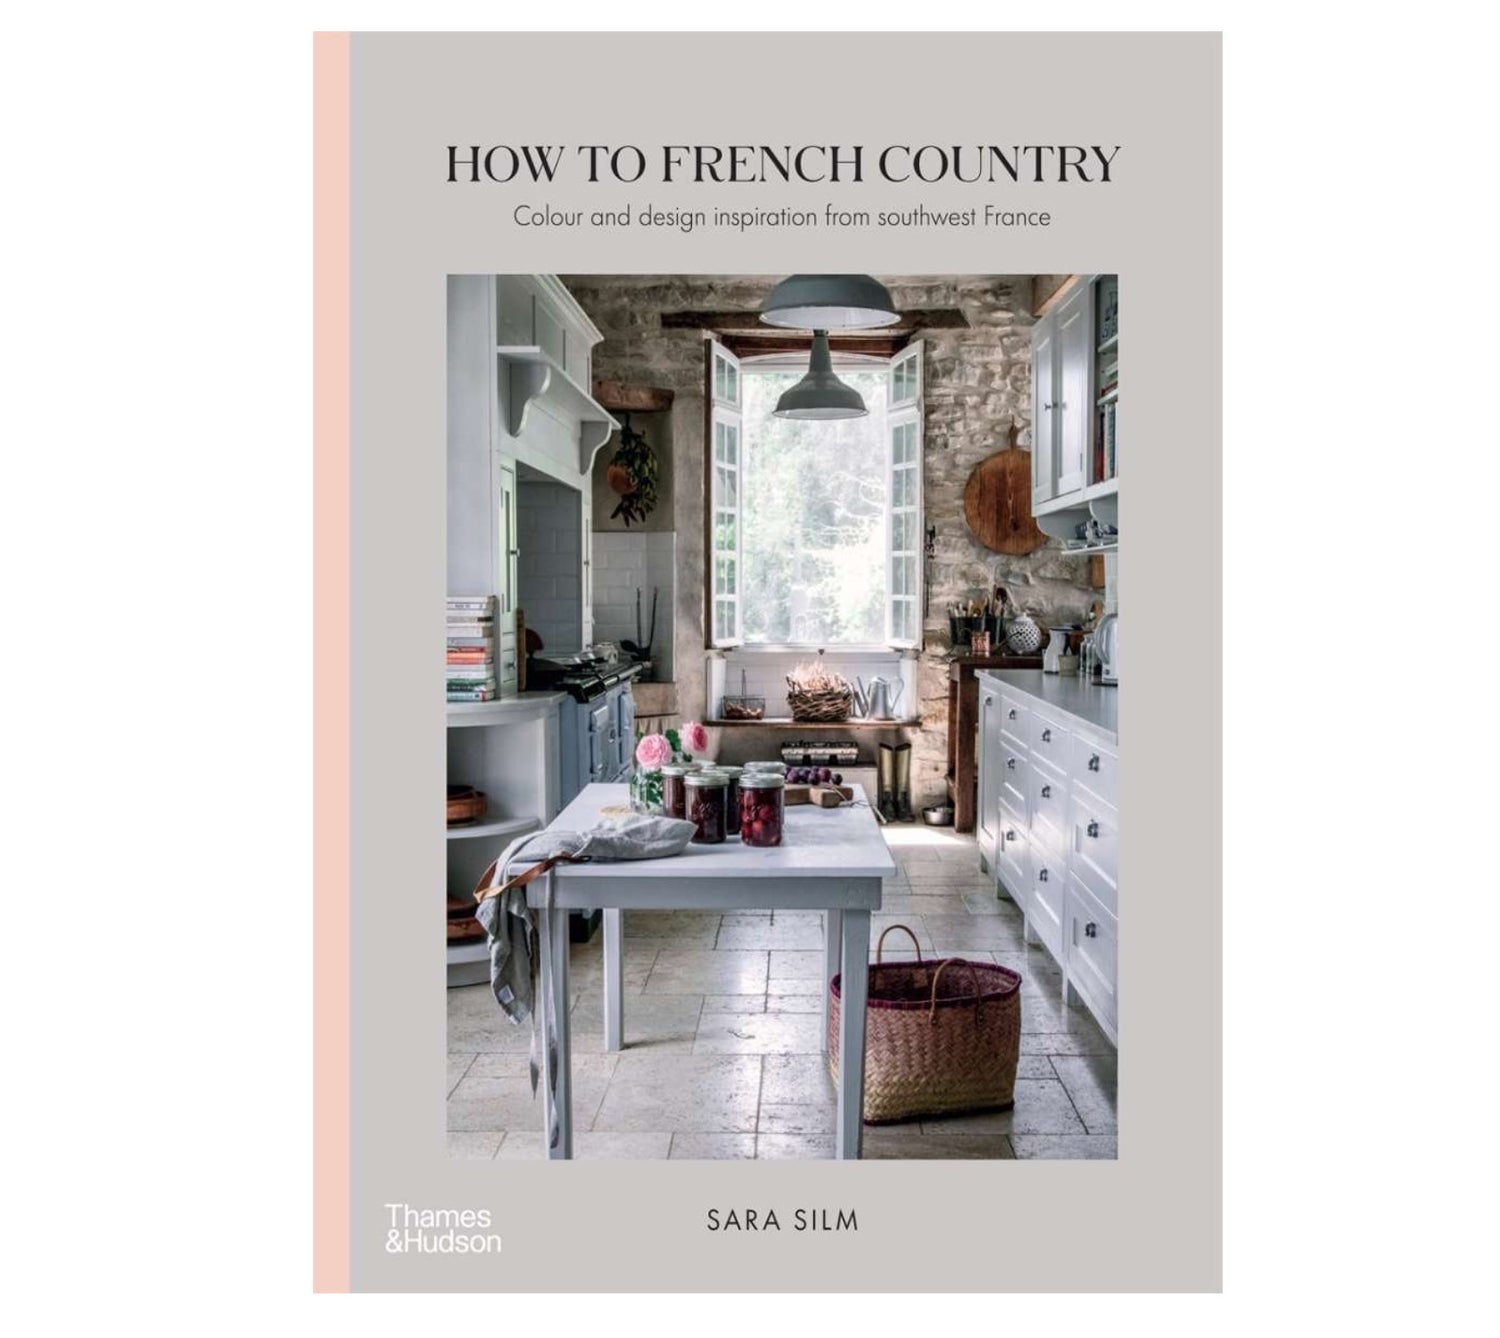 How to French Country by Sarah Slim